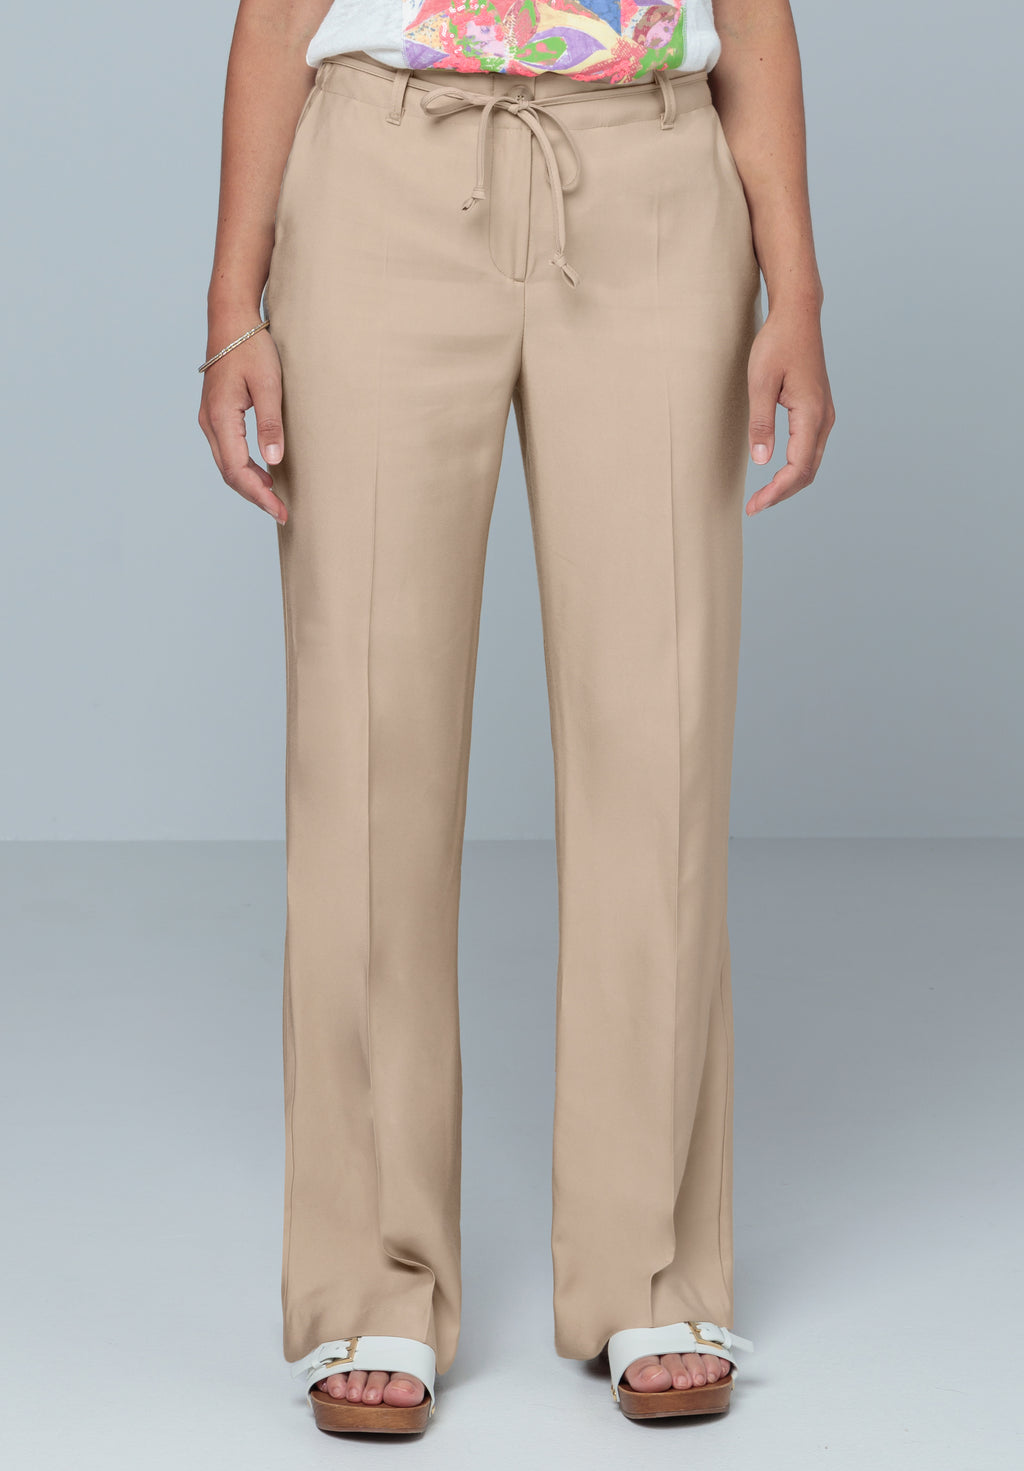 <p>Bianca parigi wide leg trousers in sand, matching jacket available as a co-ordinate </p>
<p>Product code 30020</p>